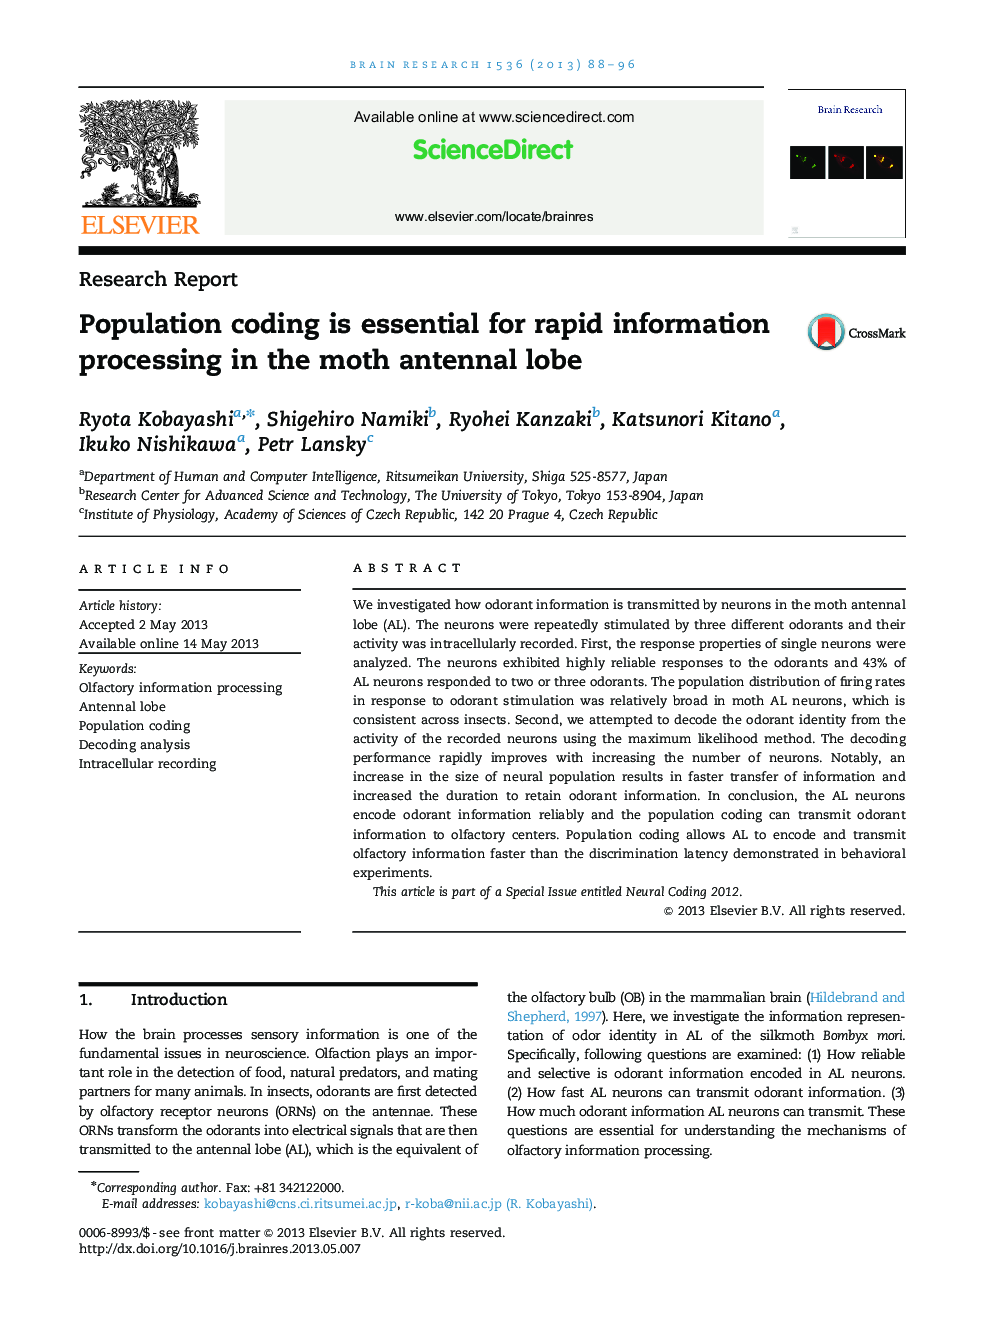 Research ReportPopulation coding is essential for rapid information processing in the moth antennal lobe